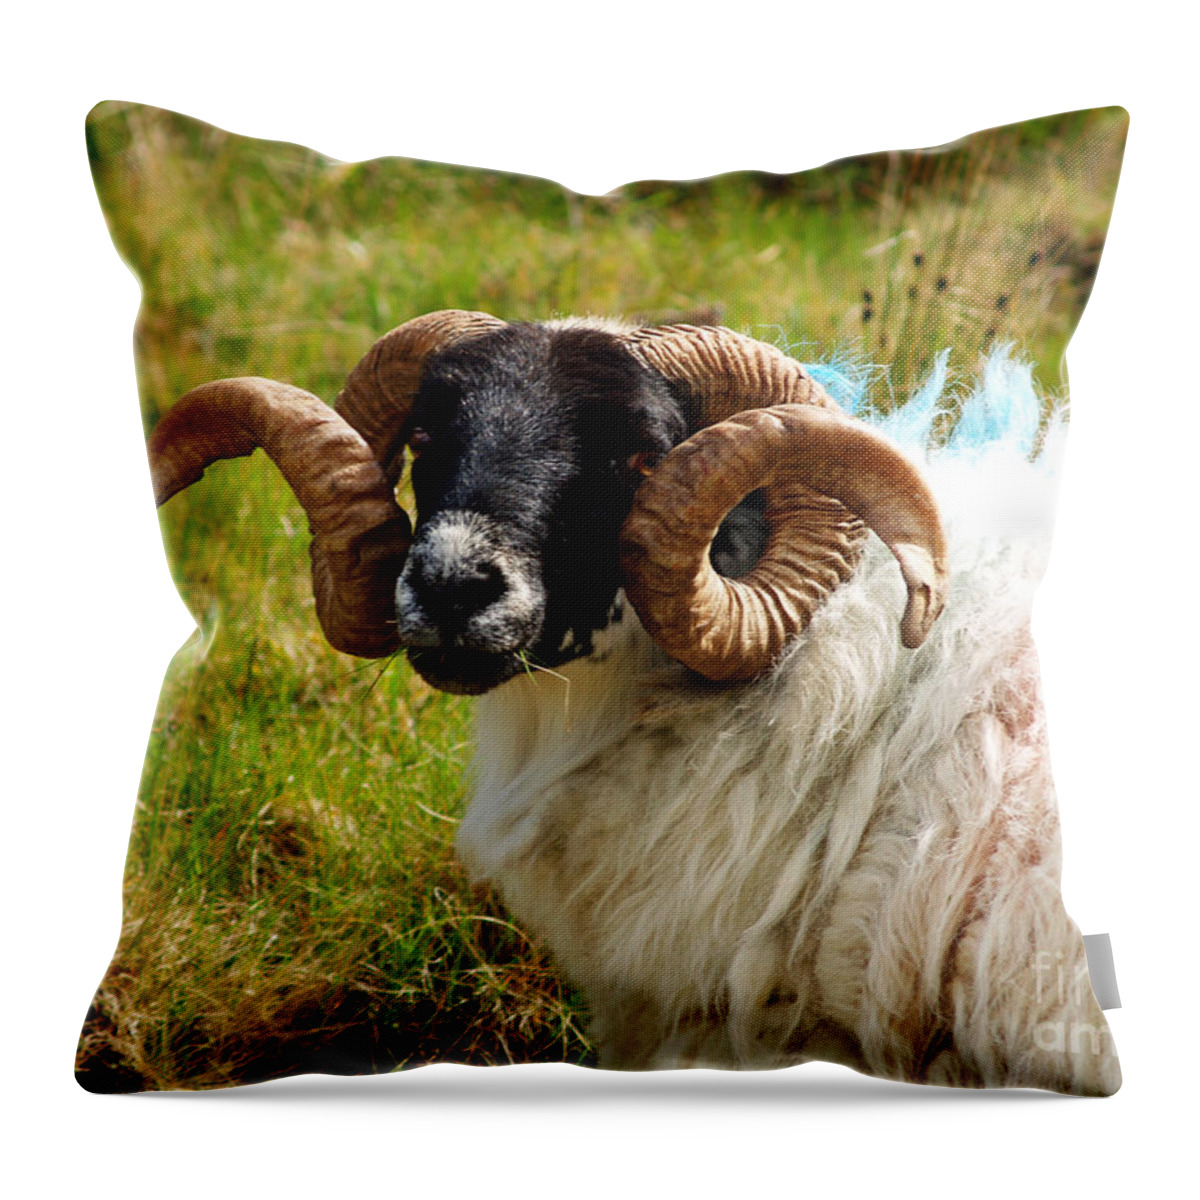 Fine Art Photography Throw Pillow featuring the photograph Lunchtime by Patricia Griffin Brett